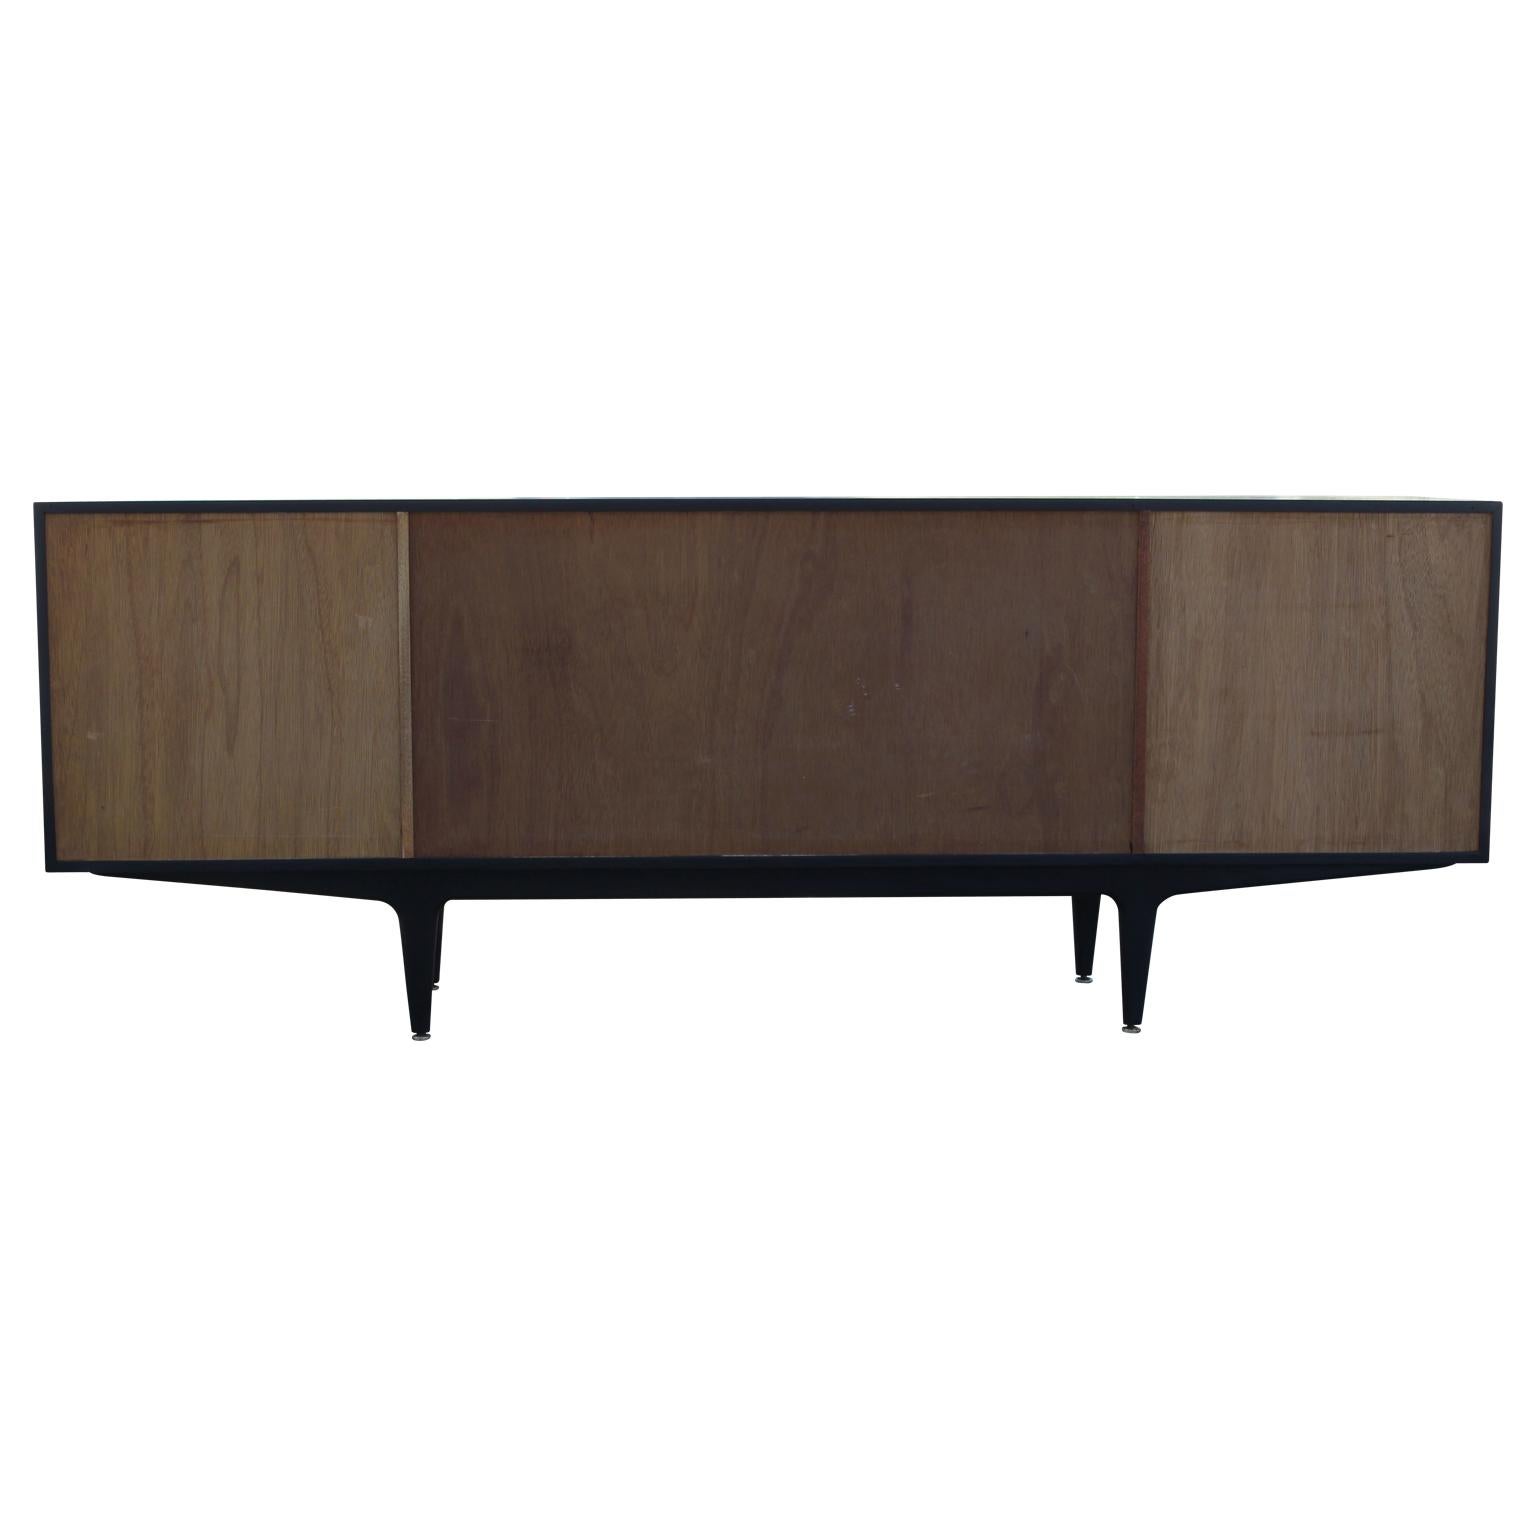 Mid-20th Century Mid-Century Modern Two-Tone Teak Sideboard or Credenza